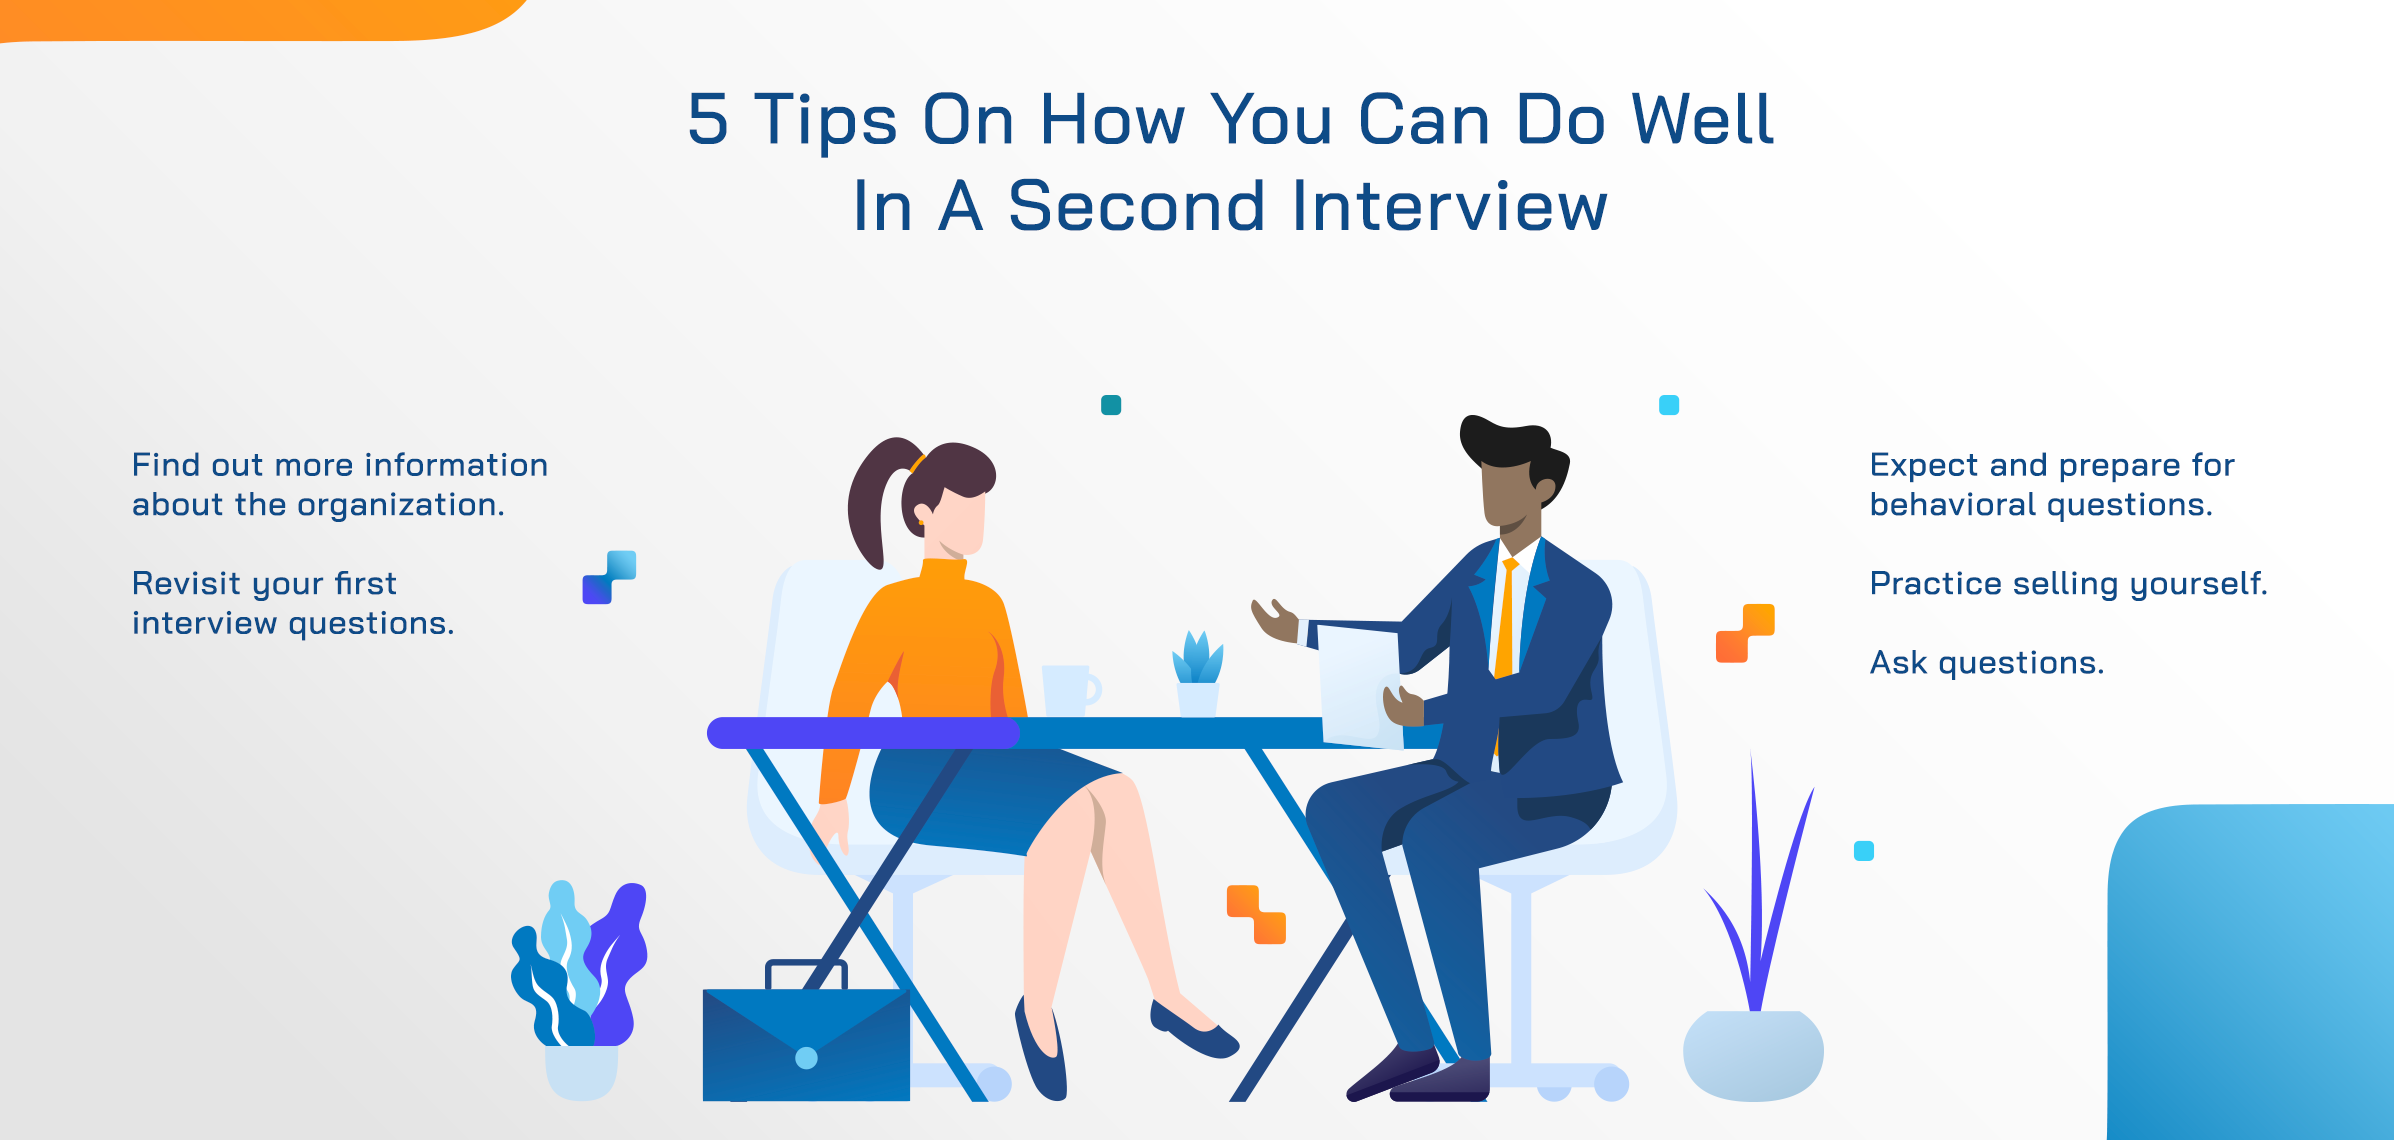 5 Tips On How to Do Well on the Second Interview